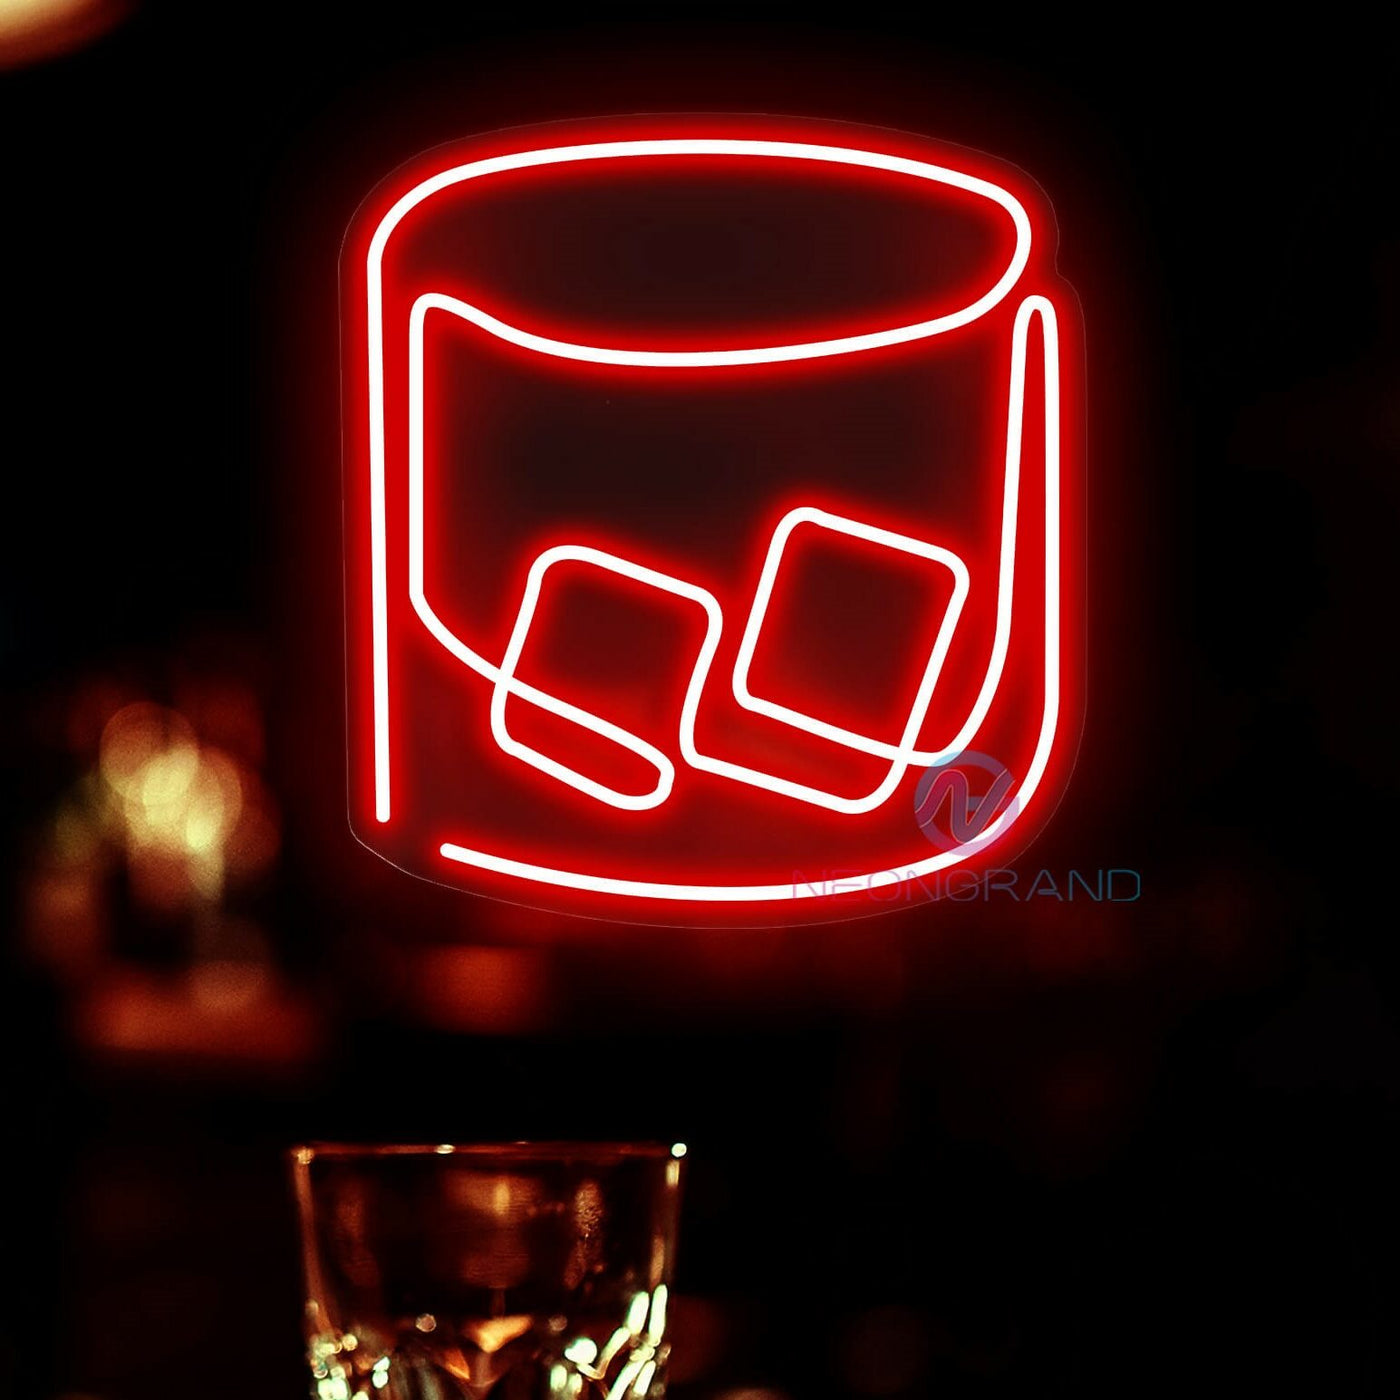 Whiskey Neon Sign Alcohol Drink Led Light main red